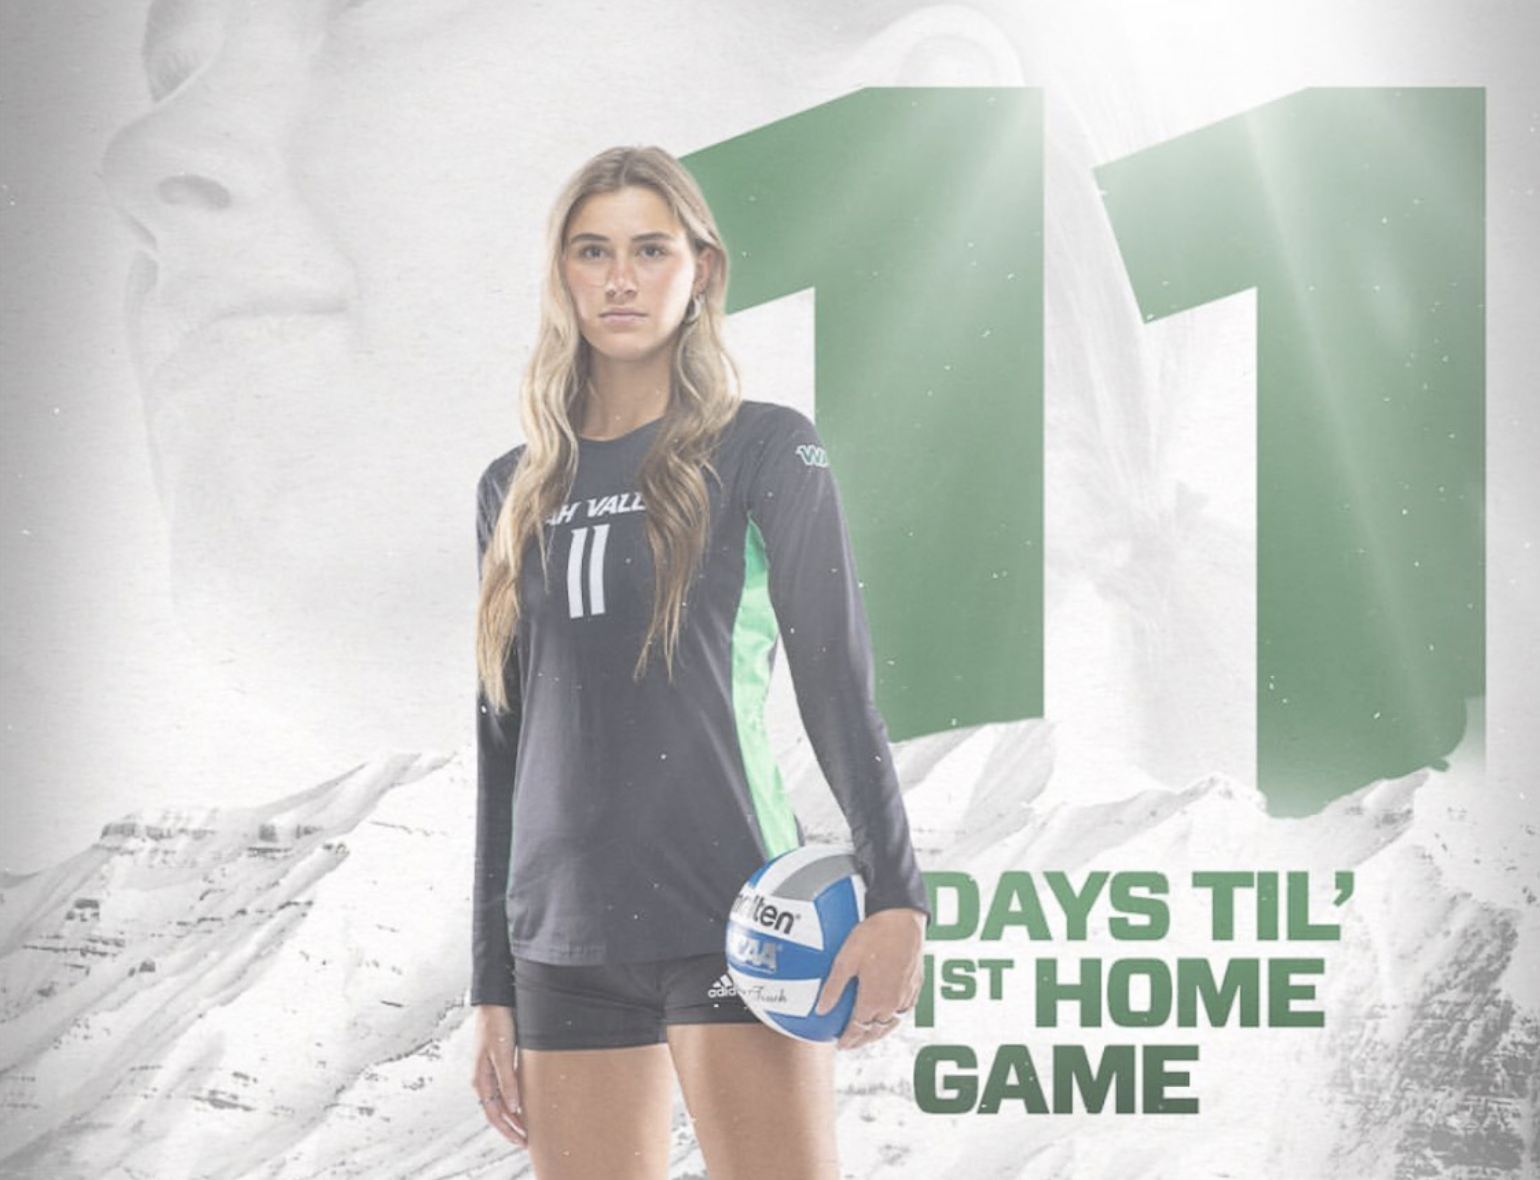 revving up for the UVU season to begin…